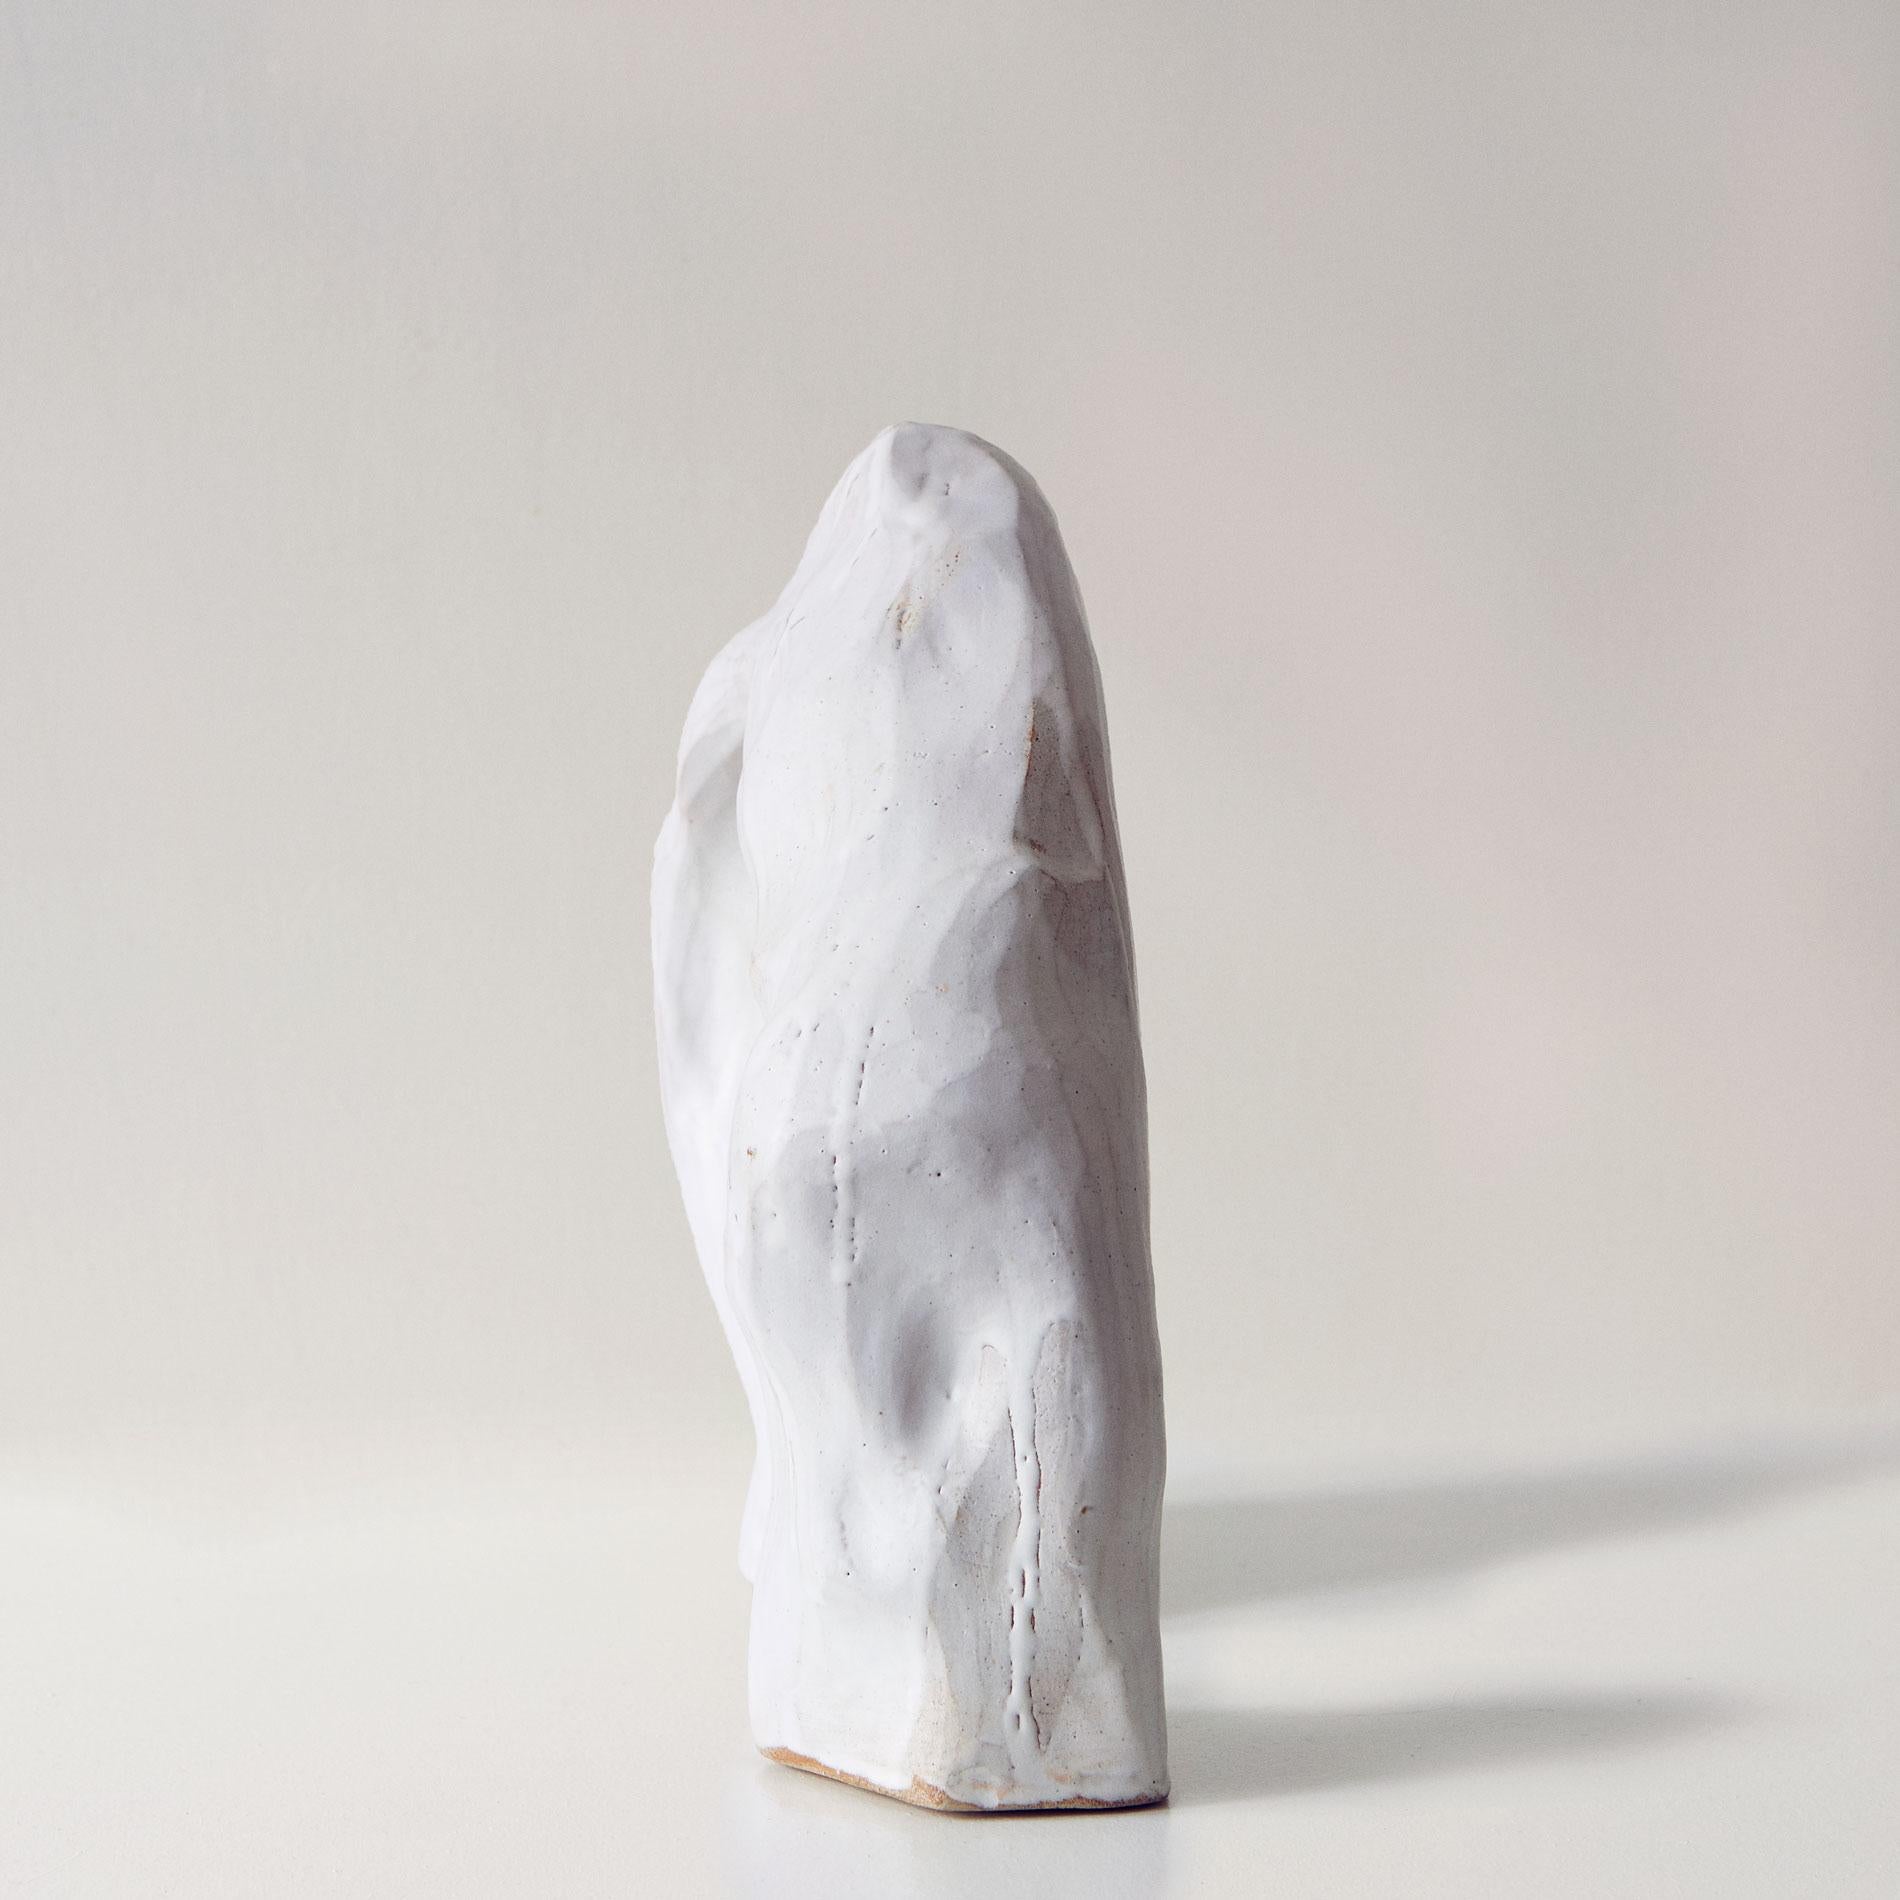 Original ceramic sculpture by Noe Kuremoto.

Noe’s ceramics explore Japanese mythology and folklore, drawing inspiration from the spirits of the natural world.

Her Yama series of sculptural forms are derived from the Japanese term for ‘mountain’,